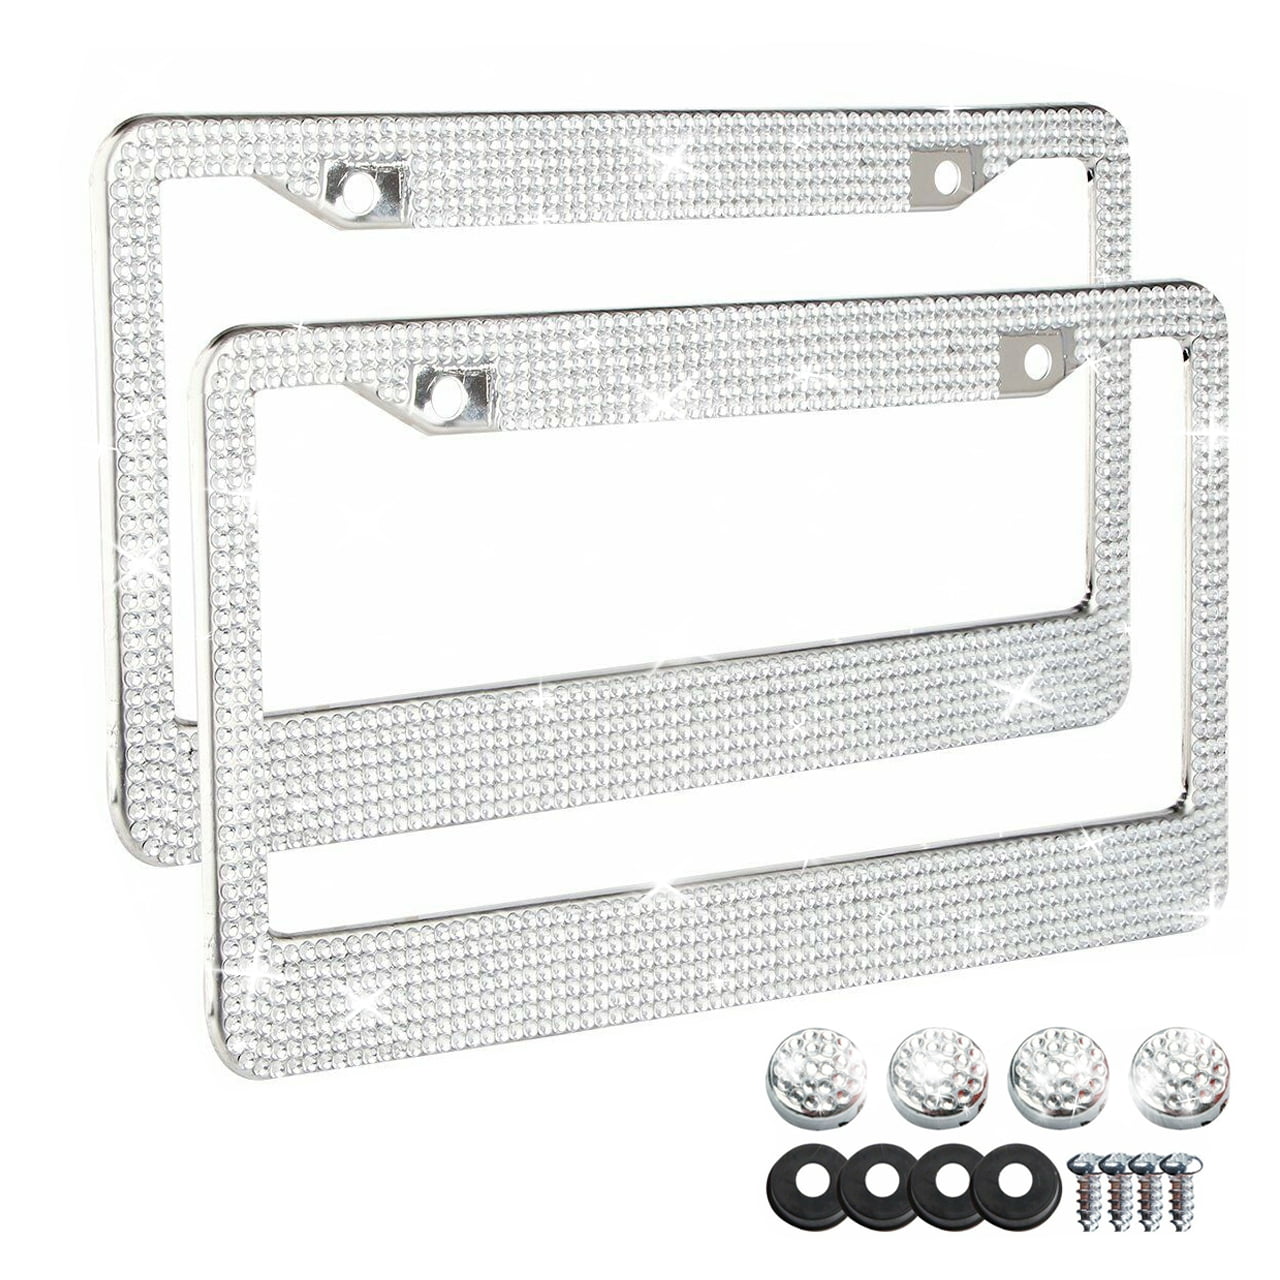 Bling License Plate Frames Bedazzled Crystal Car License Plate Cover 2PCS Rhinestone License Plate Frame Sparkly Stainless Steel License Plate Frames with Premium Gift Box for Women/Girls/Friends 